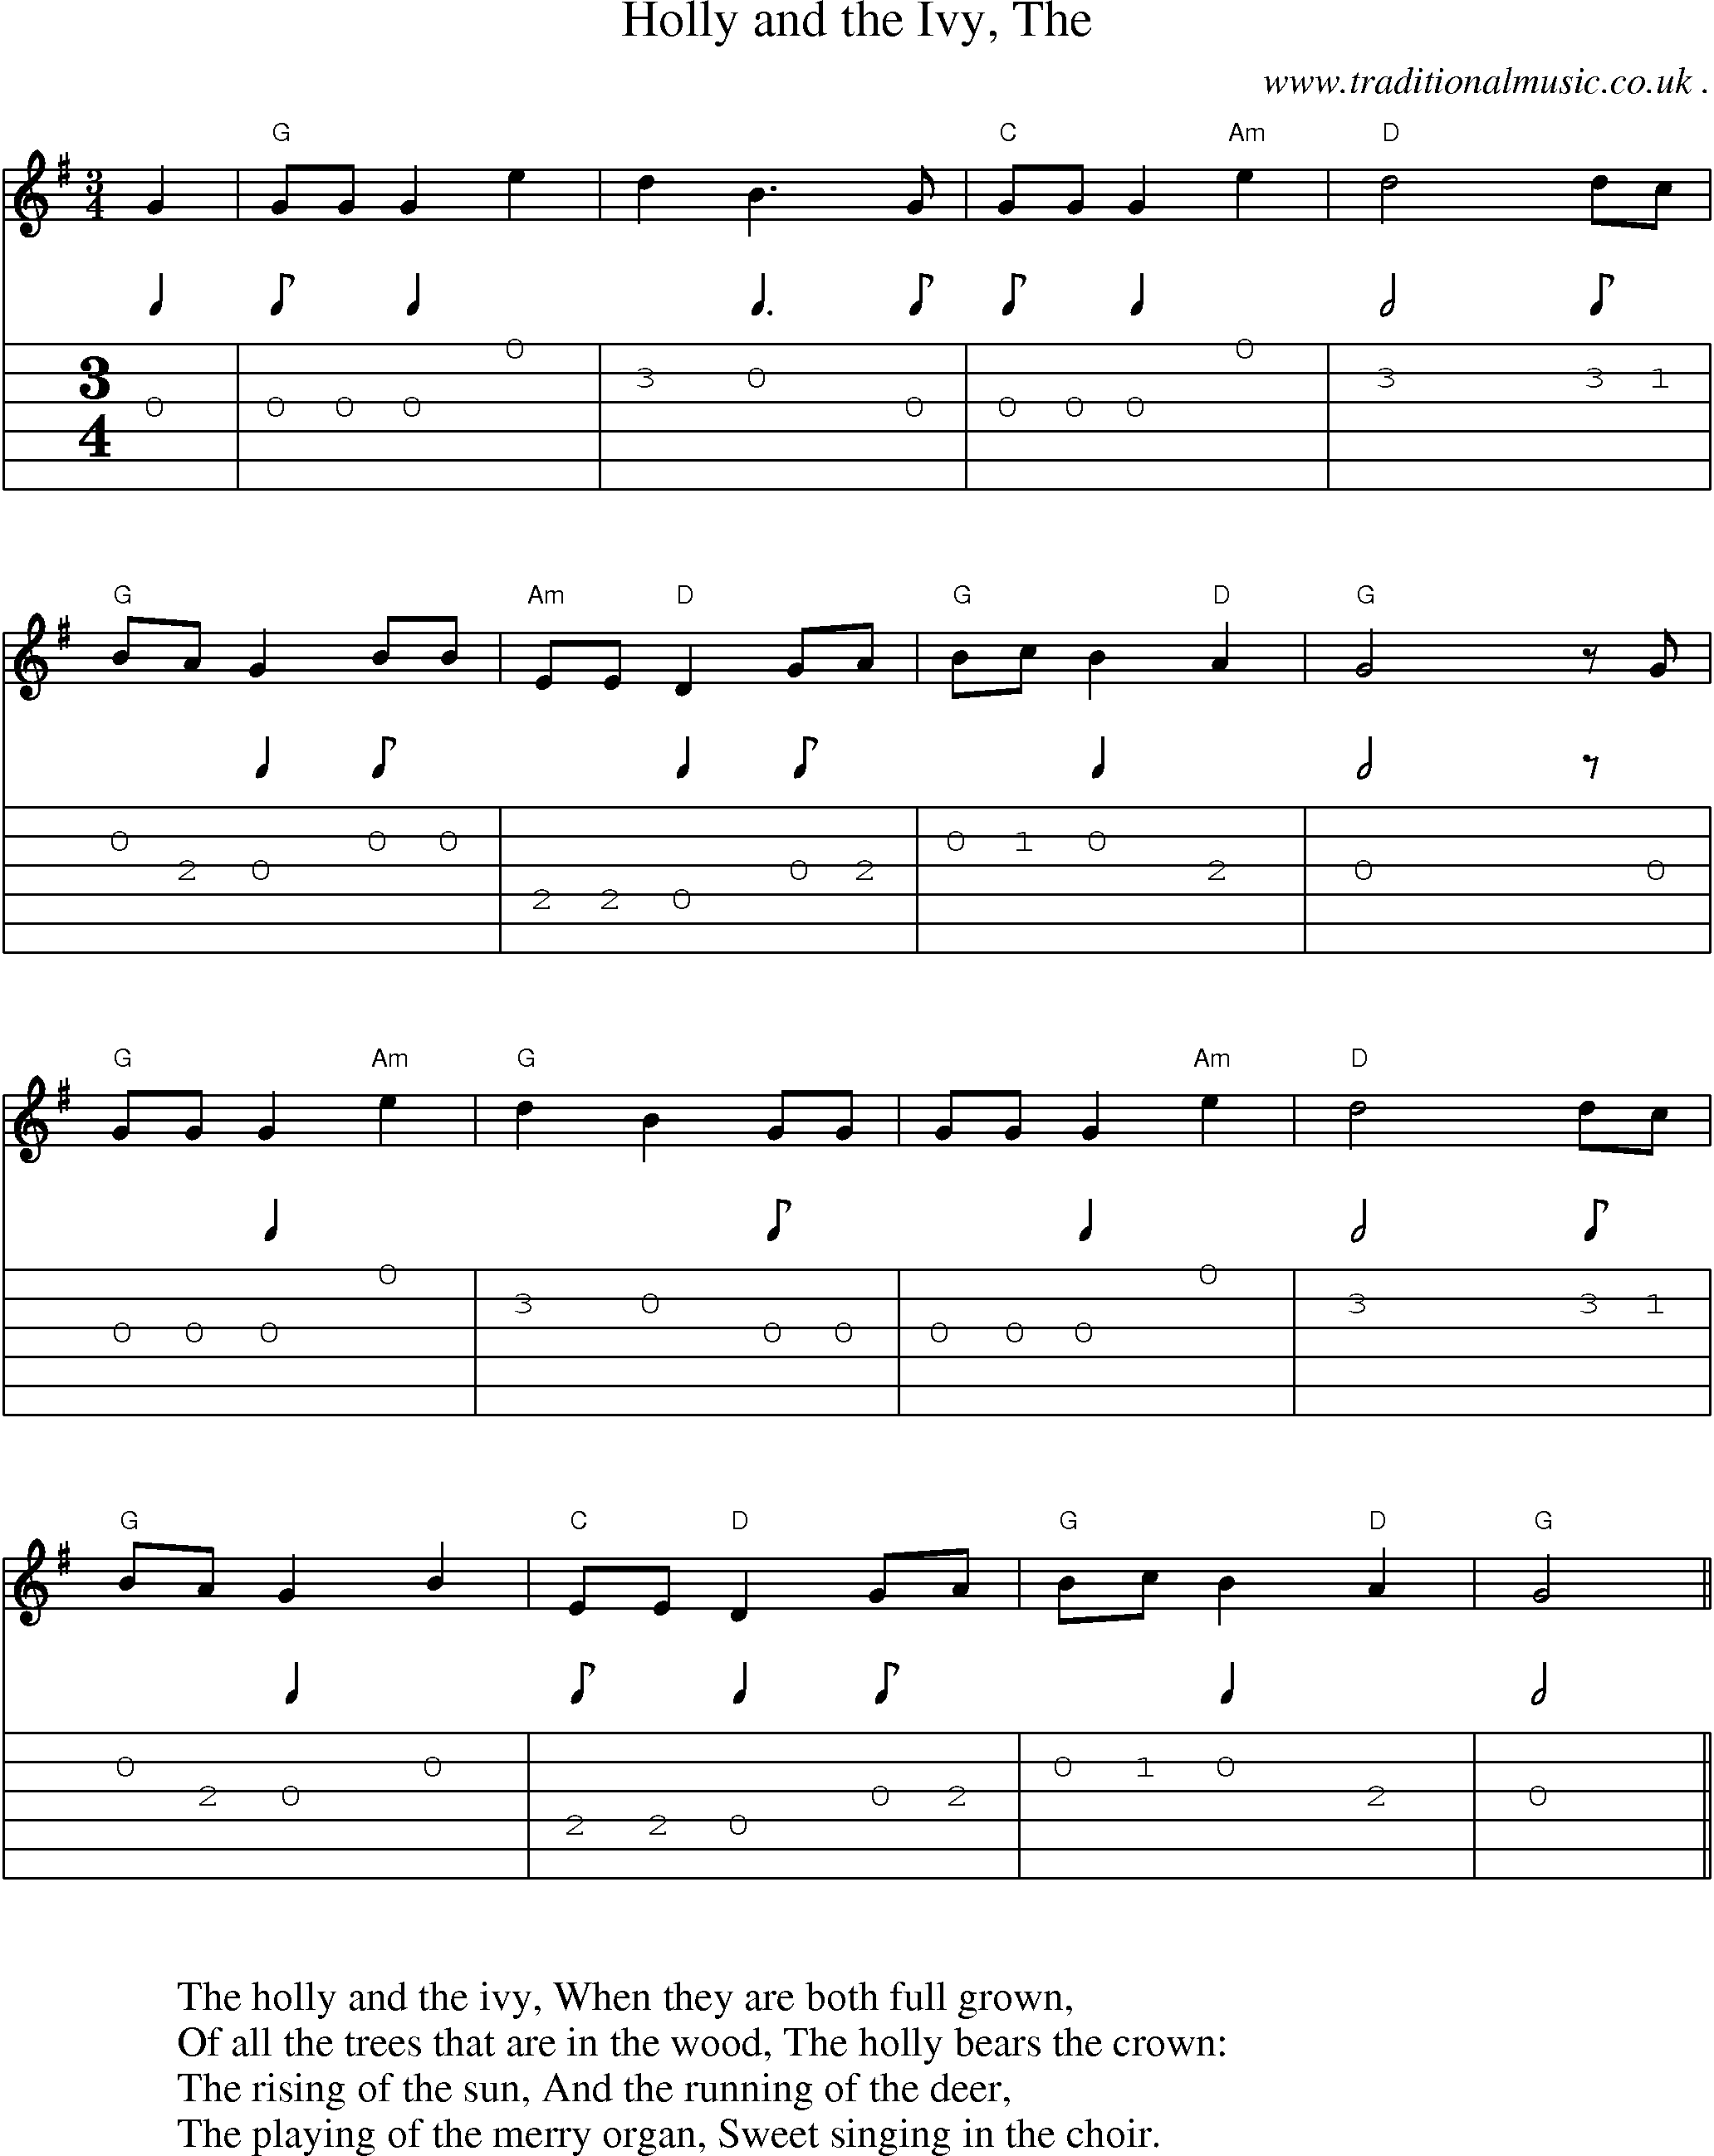 Music Score and Guitar Tabs for Holly and the Ivy The